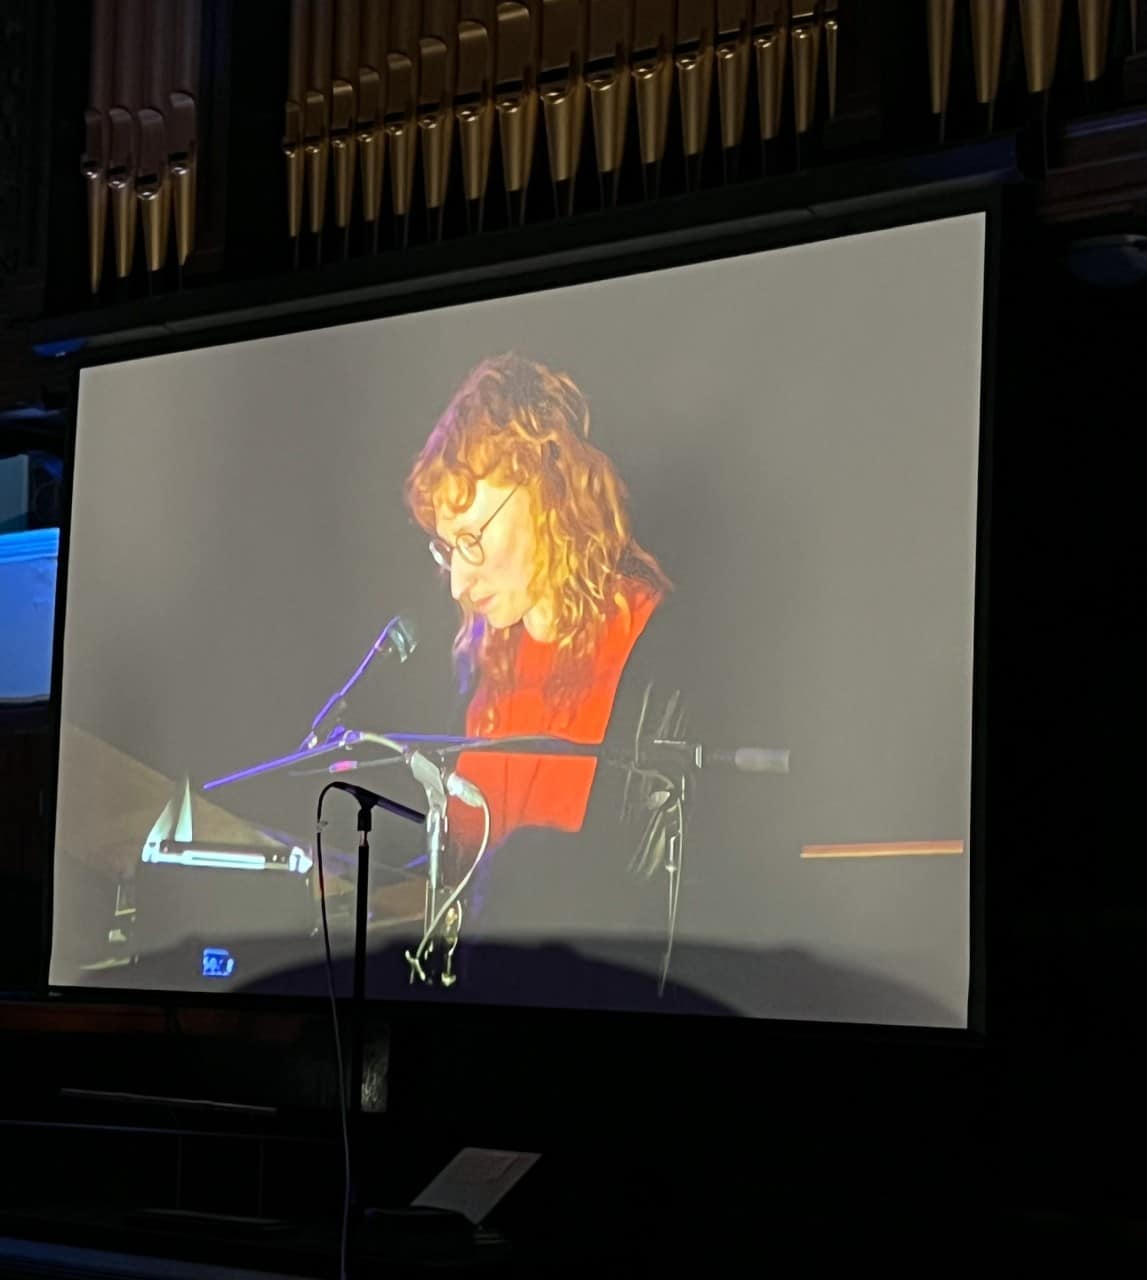 Musician Kelly McMichael Plays Piano on the Big Screen  - I absolutely loved the addition of the piano to the concert.  Artist Kelly McMichael is an amazing artist to check out at a live music venue in St. John’s, Newfoundland. 